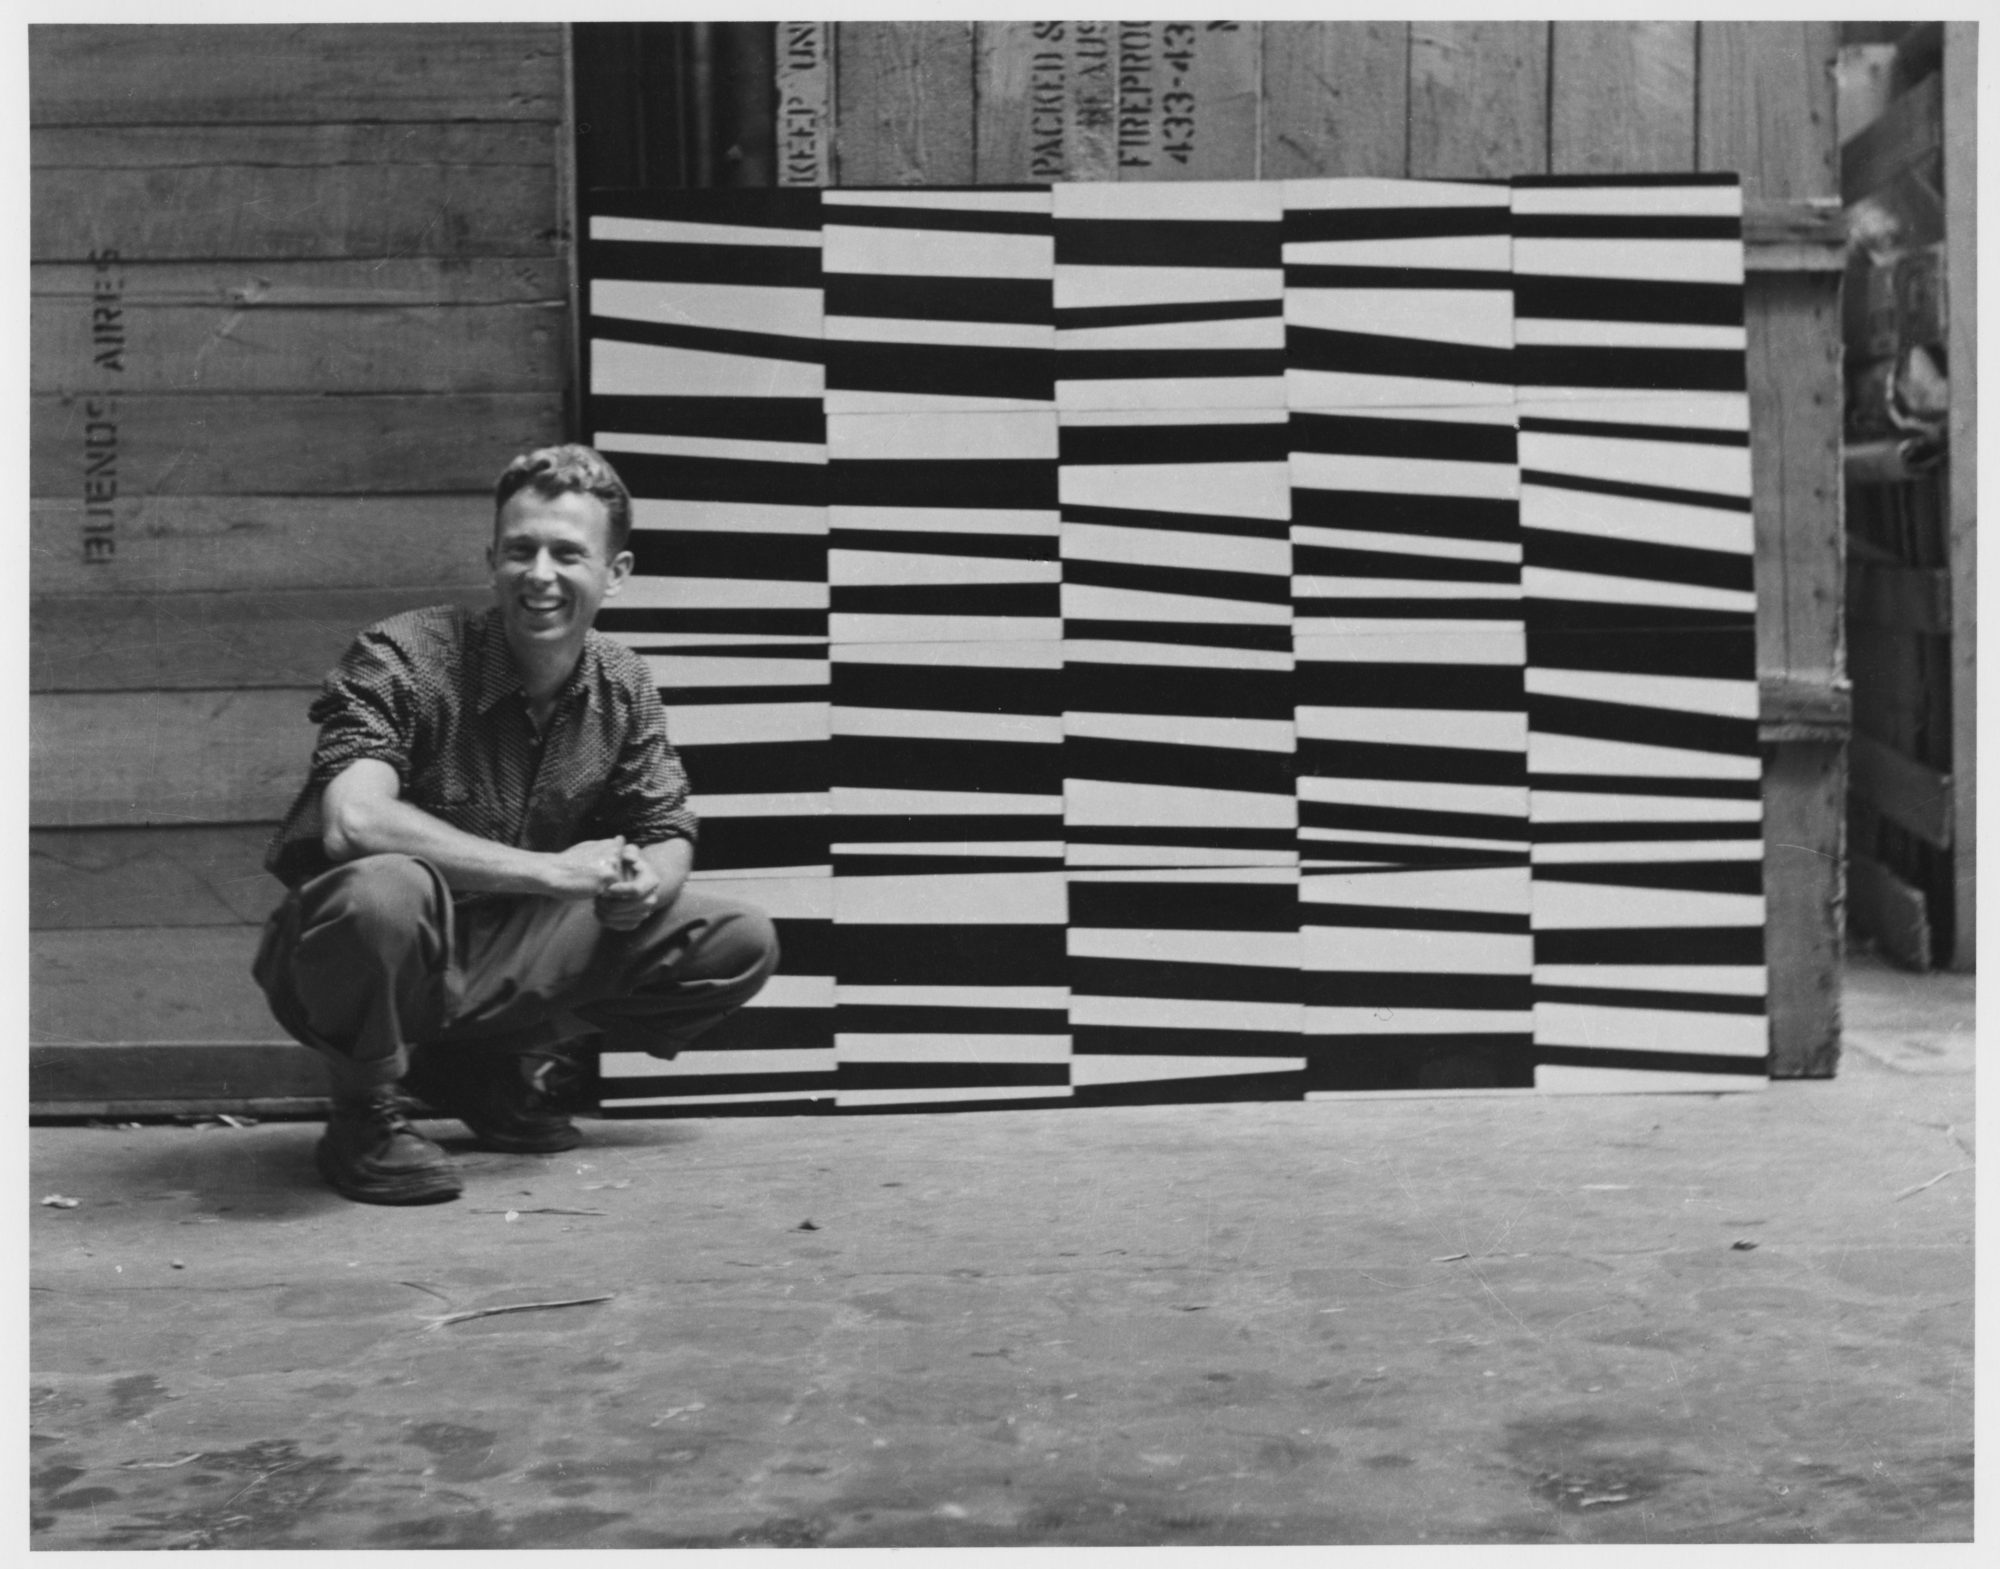 A photograph of the artist Ellsworth Kelly, crouching next to his upside down painting of patterns titled 